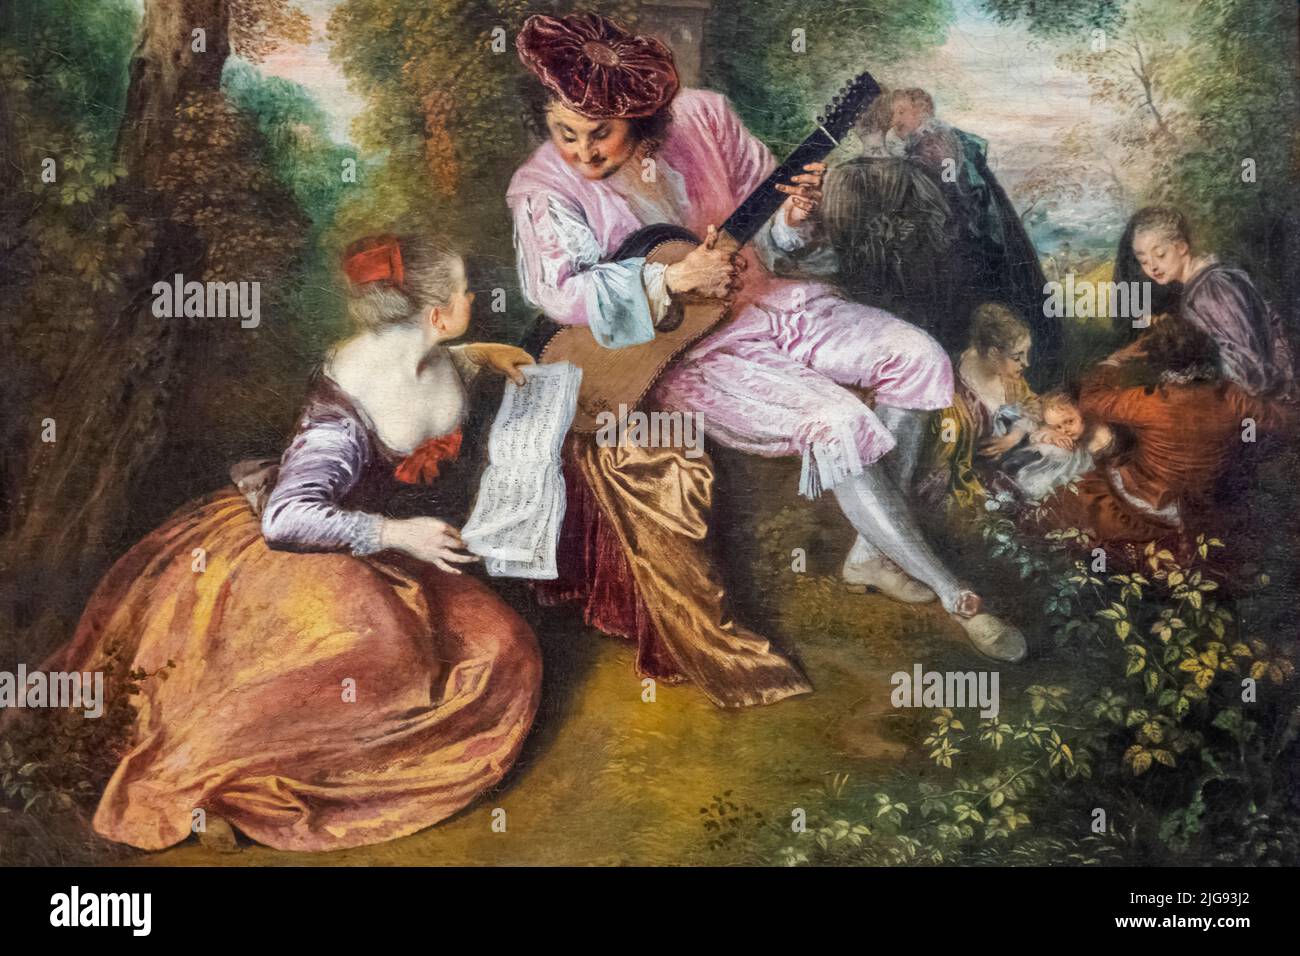 Painting titled 'The Scale of Love' by French Artist Jean-Antoine Watteau dated 1717 Stock Photo